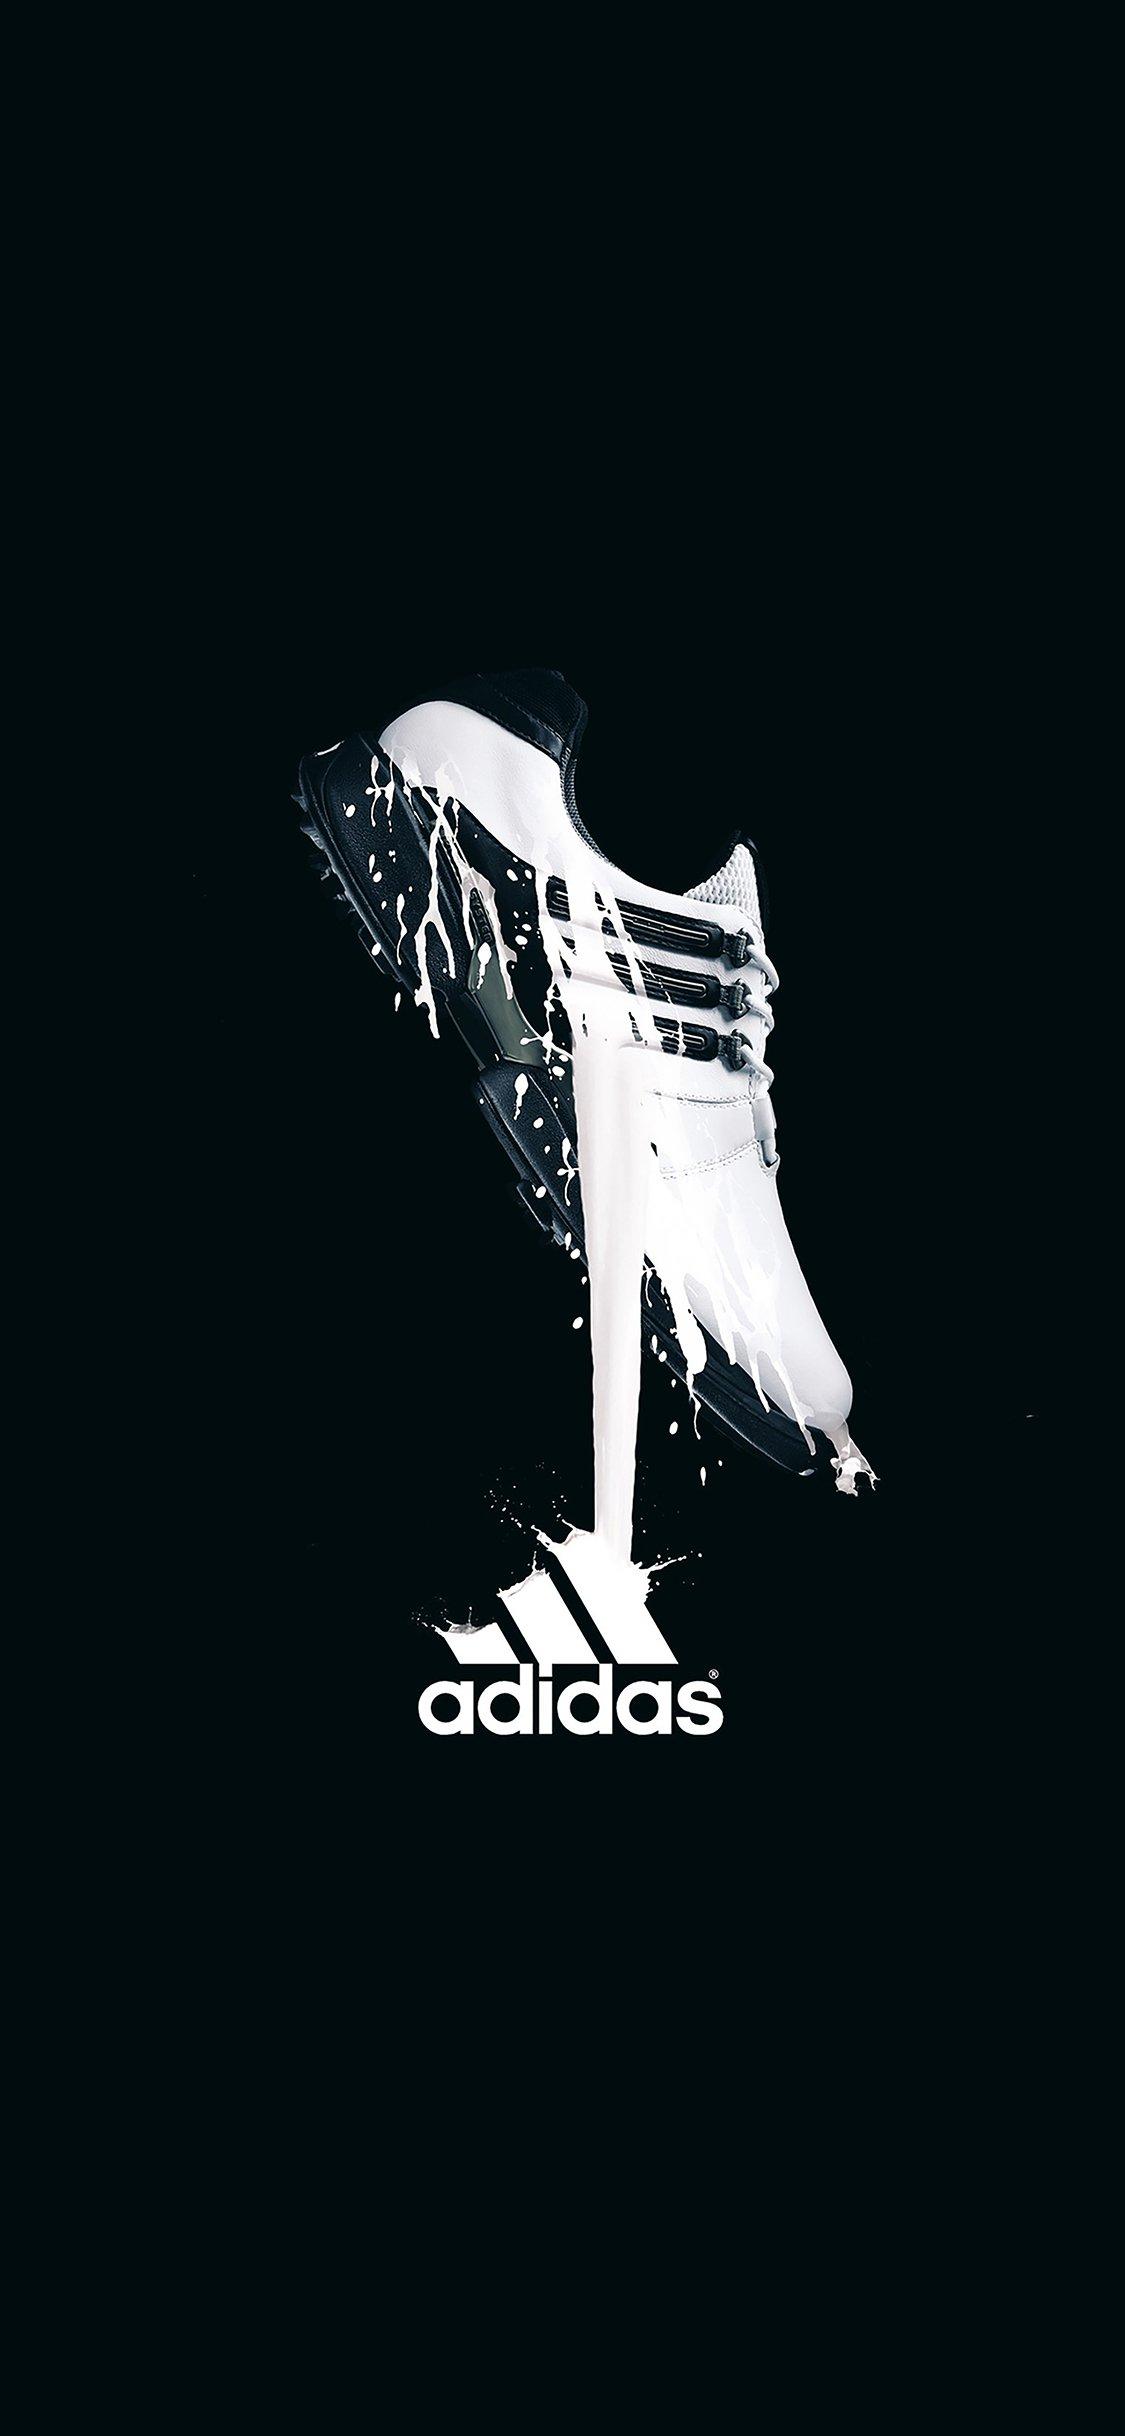 Top Brands Final Clearanc Adidas Boost Iphone Wallpaper 56 Off Gdctral Ac In